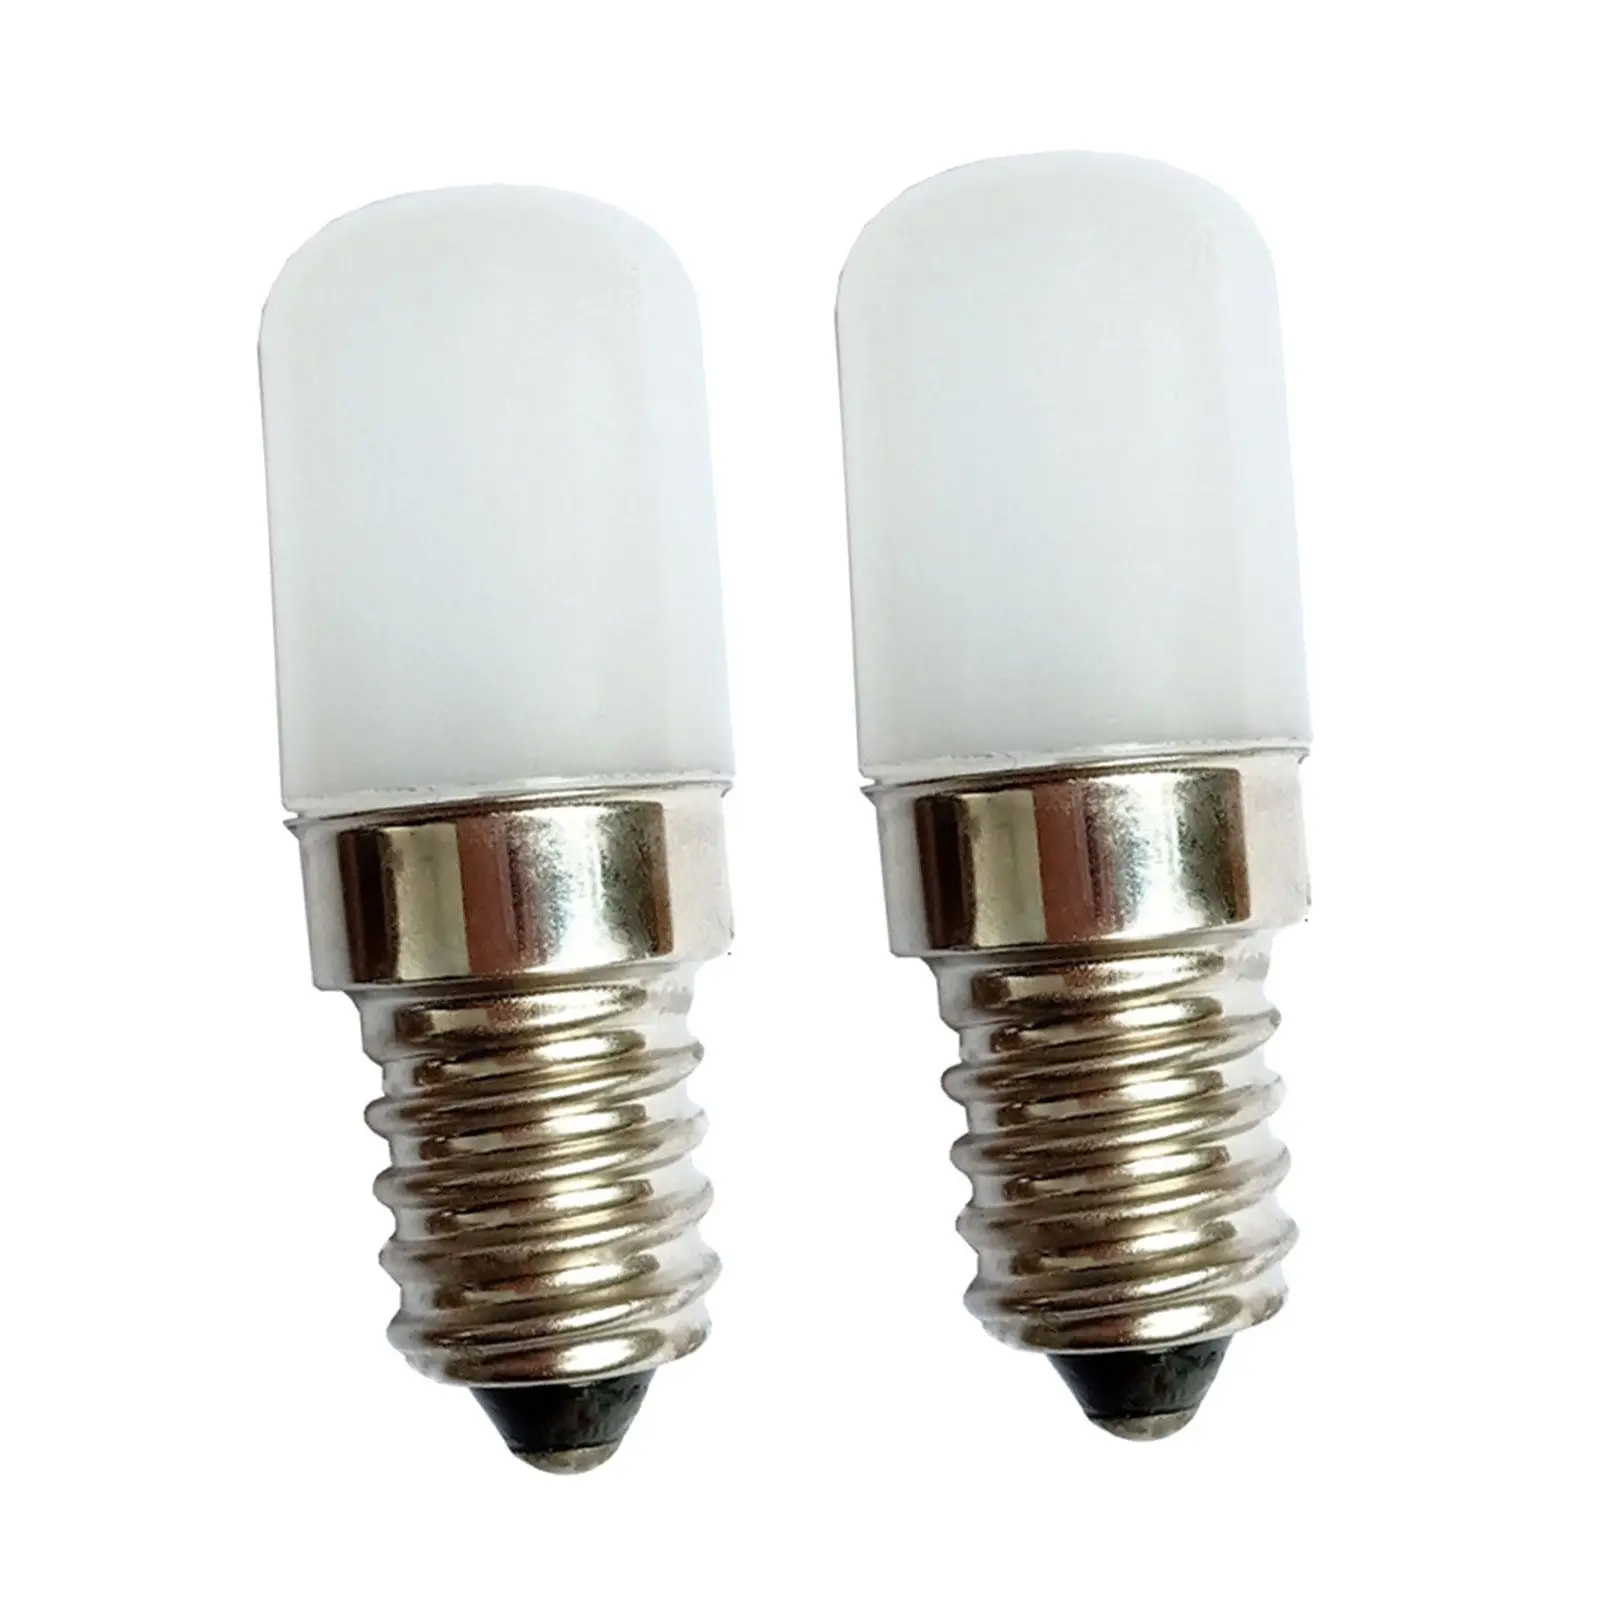 2 Pieces Refrigerator Cabinet Light Replacement Bulb Spare Parts Durable Replacement Small Light Bulb for Home Refrigerator Part